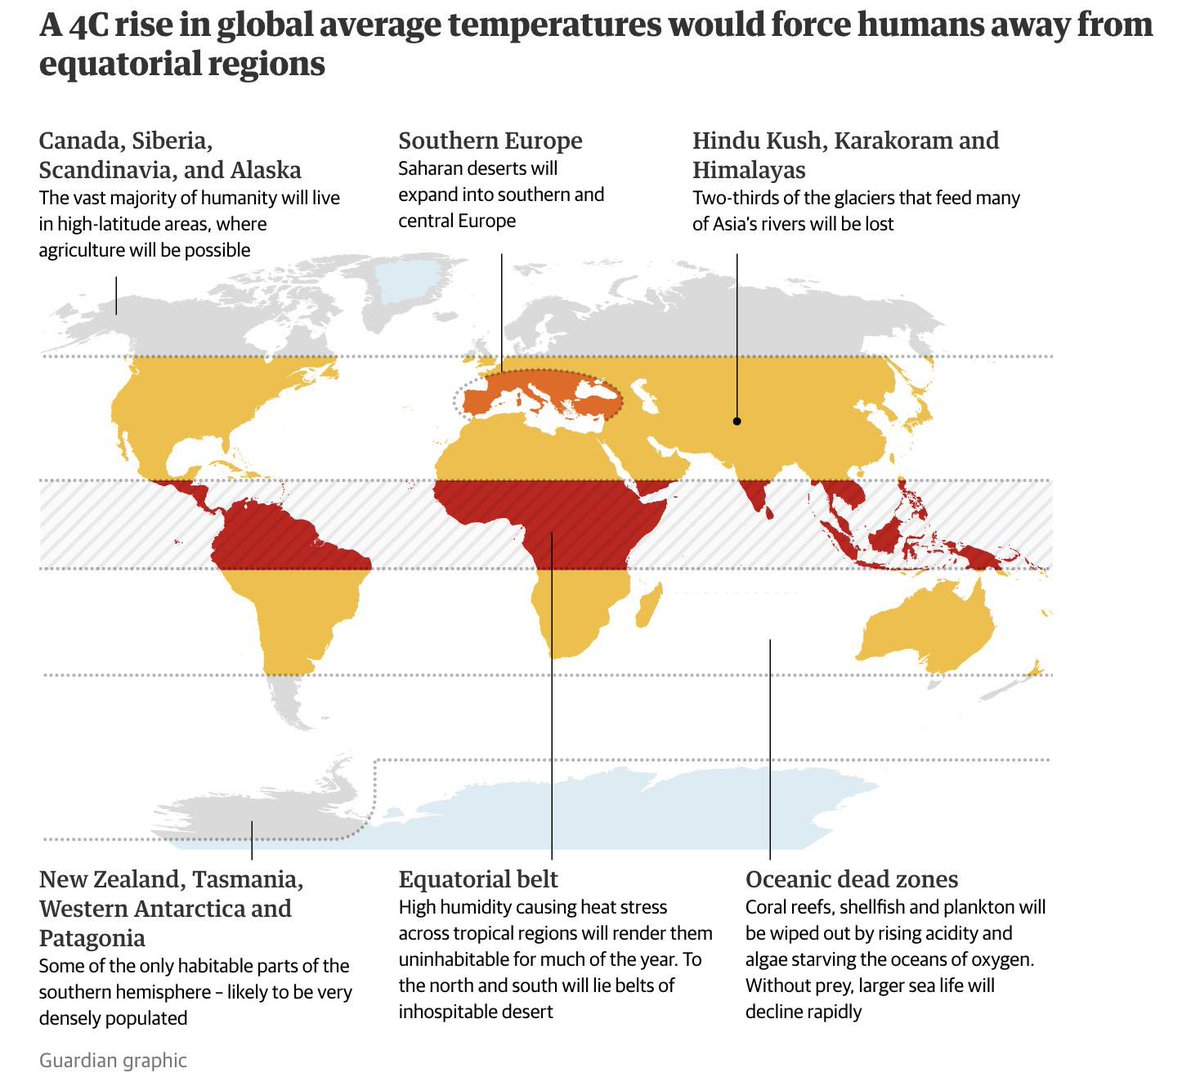 With the current heatwave happening all across SEA, scientists predict what’s gonna happen if Earth’s temperature rises by 4°C. The result is scary. The heat will be so intense that equatorial regions will be uninhabitable. SEA will be one of the most affected regions.